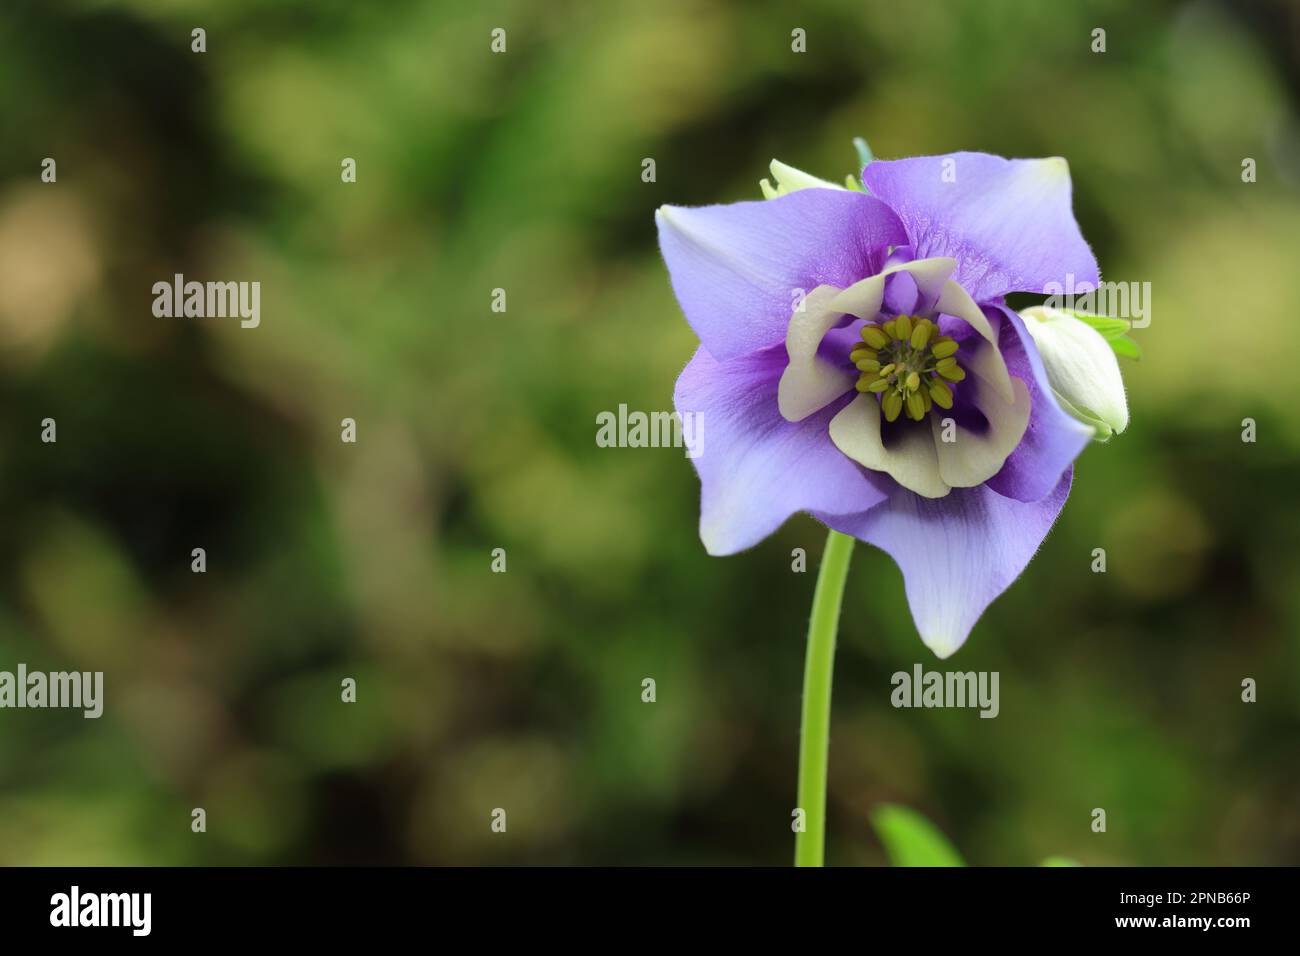 close-up of a single flower of aquilegia caerulea blue star against a natural blurry background, copy space Stock Photo